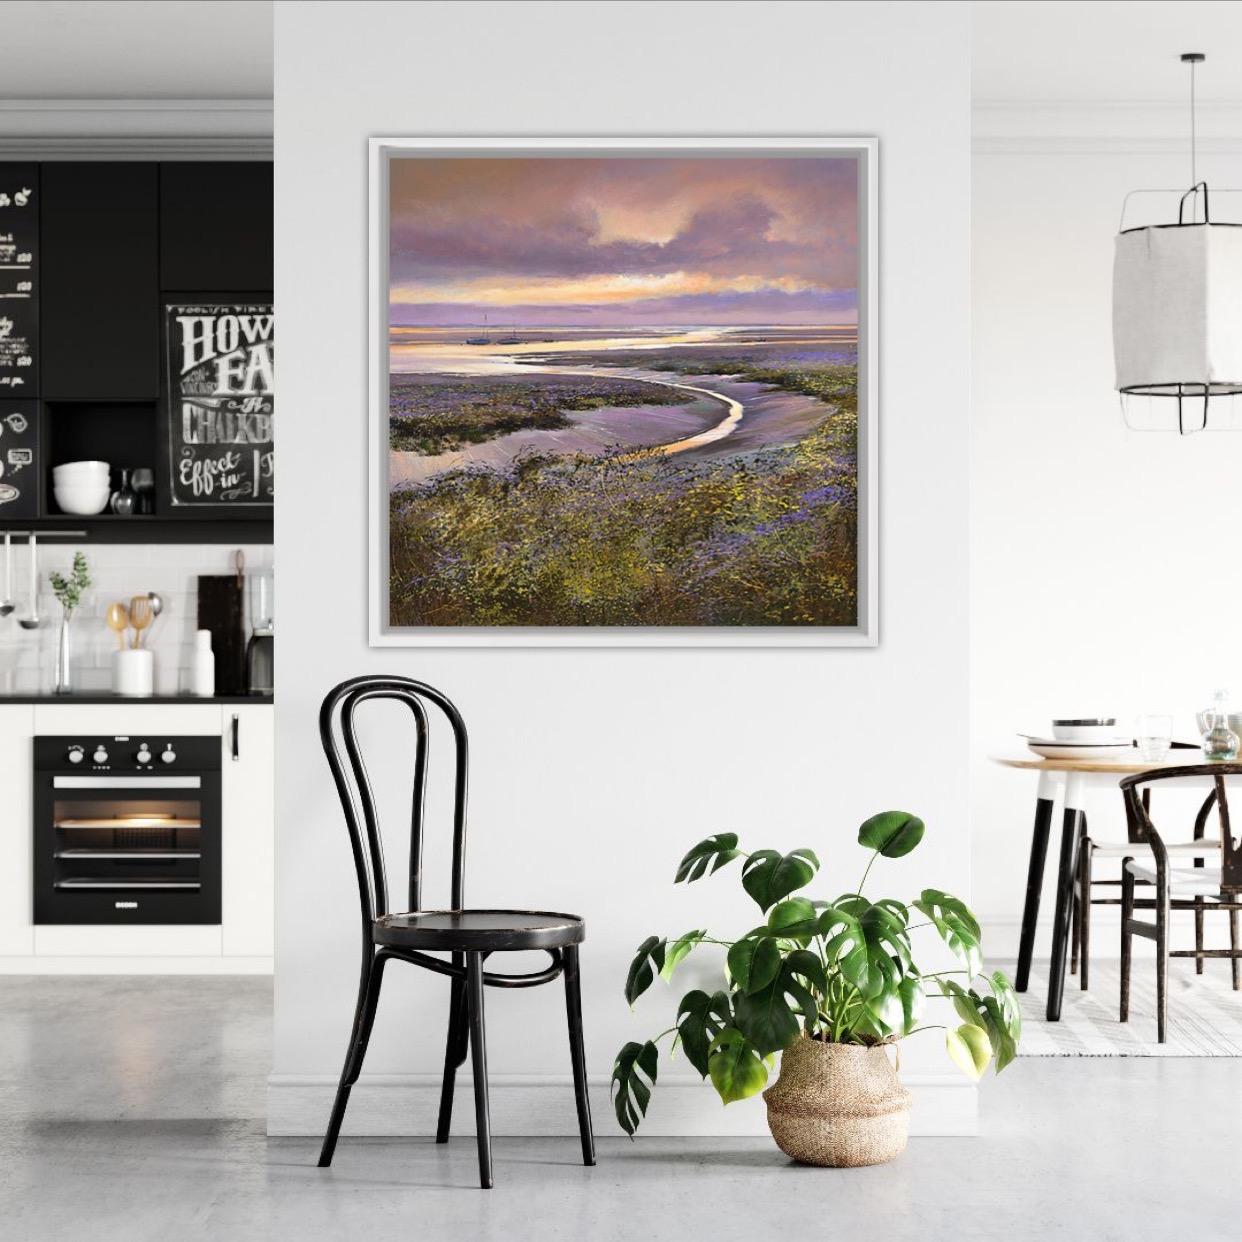 Duck at Morston, Large Canvas Print, Affordable Art, Art for sale, Landscape  - Gray Figurative Print by Michael Sanders